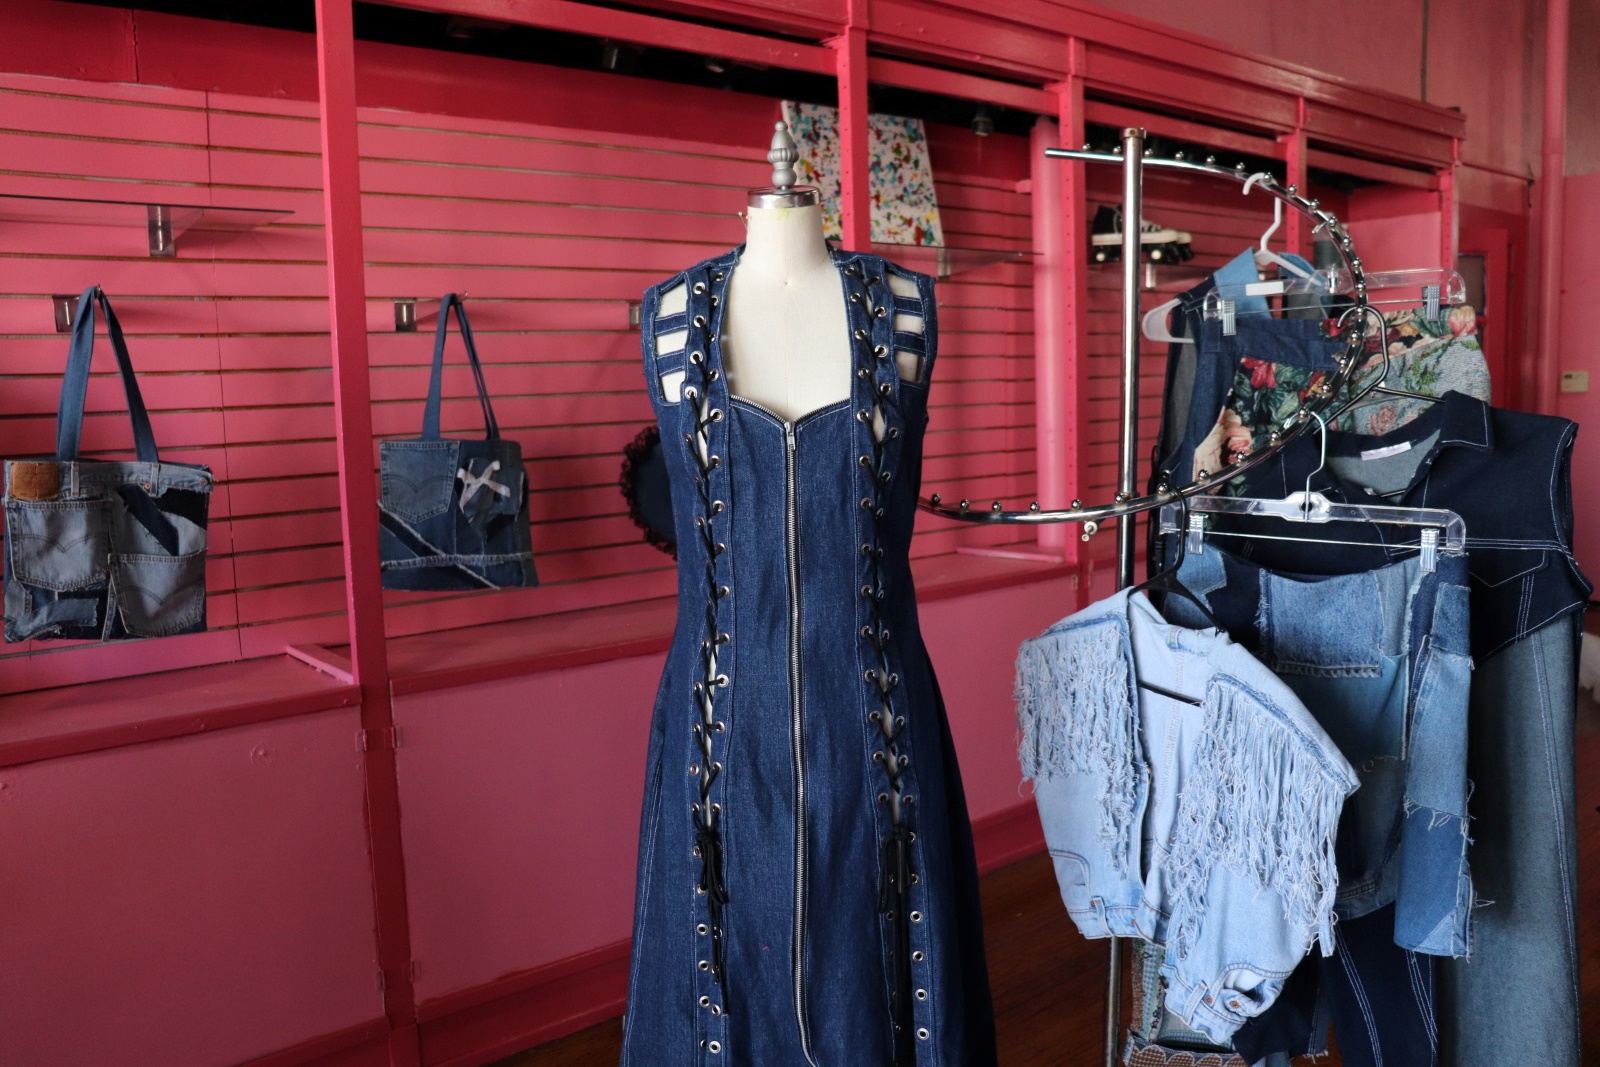 A denim dress in a boutique with pink walls and shelves